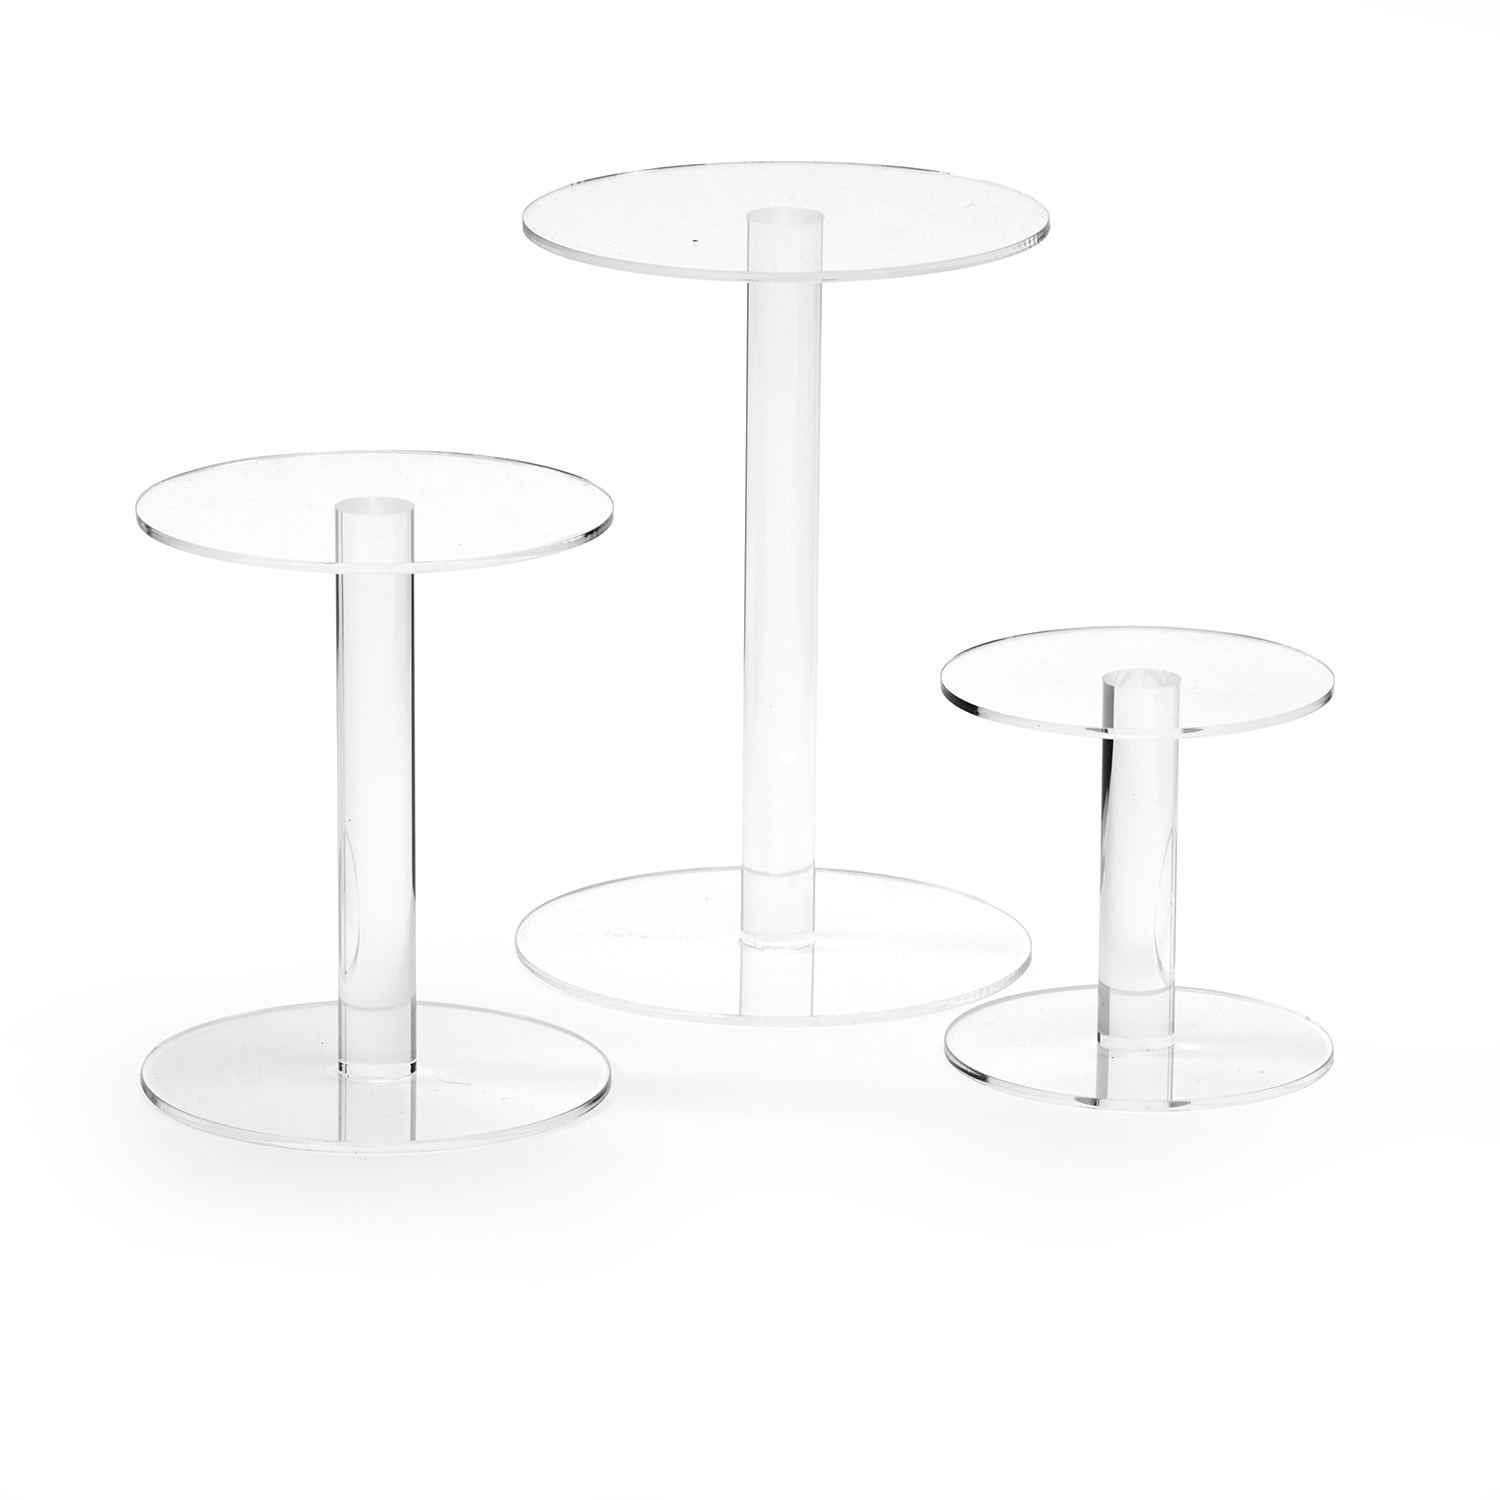 Clear Acrylic Display Riser 1 Set of 3pcs 3 4 5 Jewelr for sale online ADOROX Top Quality 